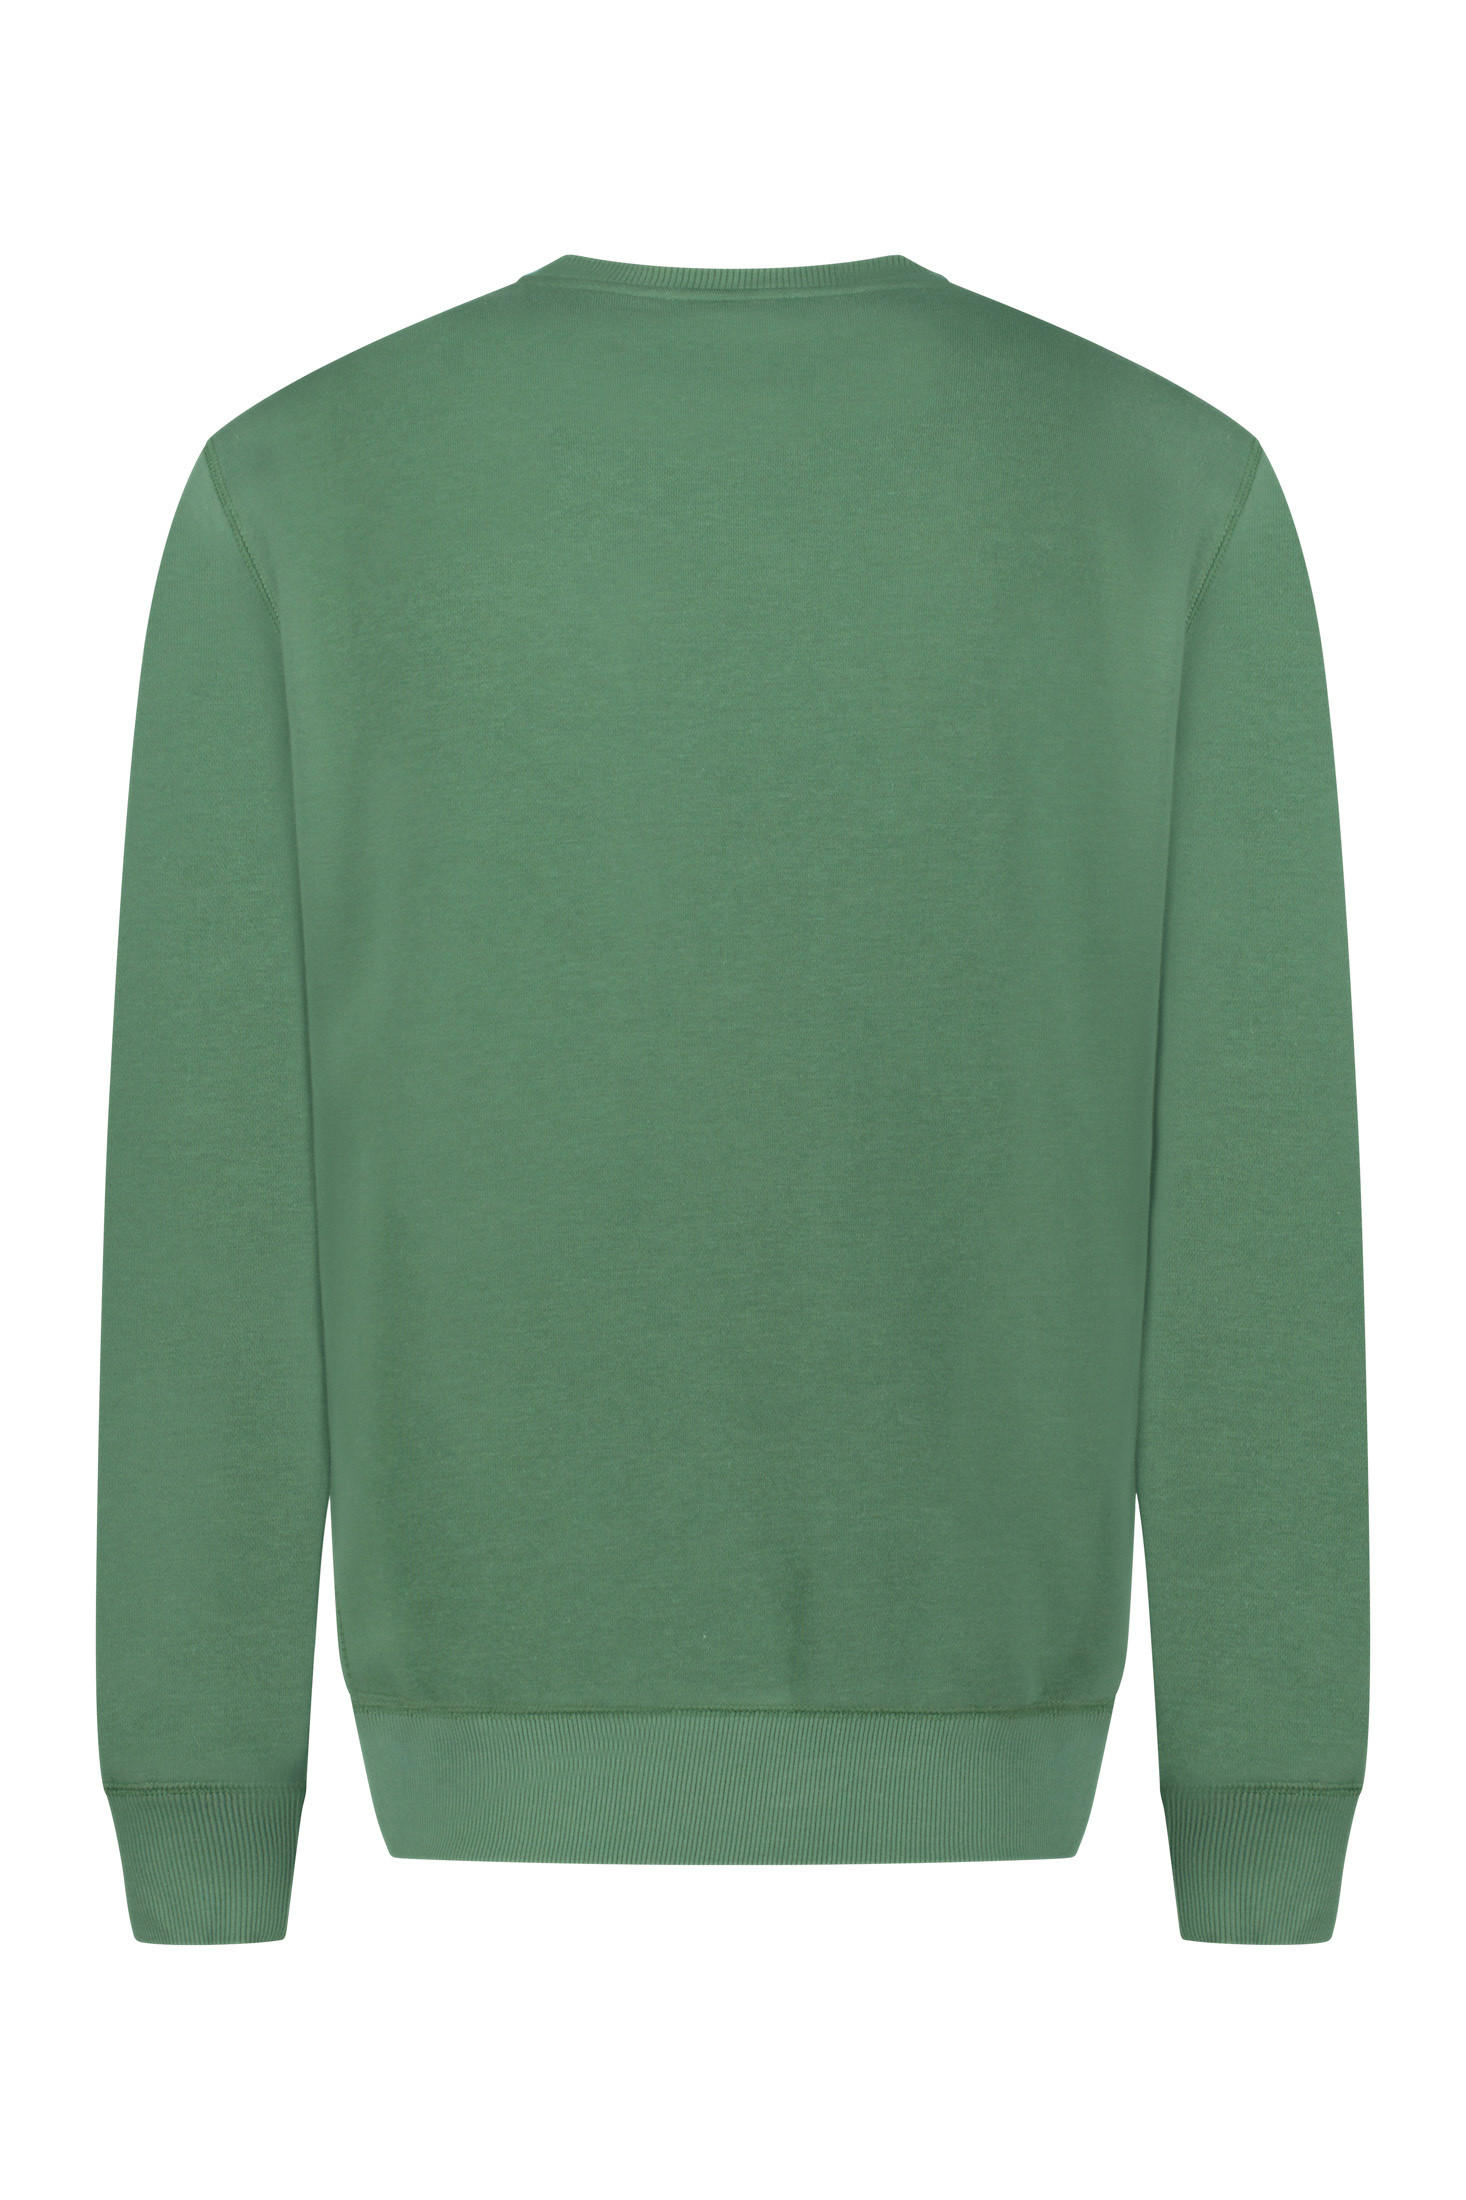 Russell Athletic - Sweatshirt with embroidery, Light Green, large image number 1